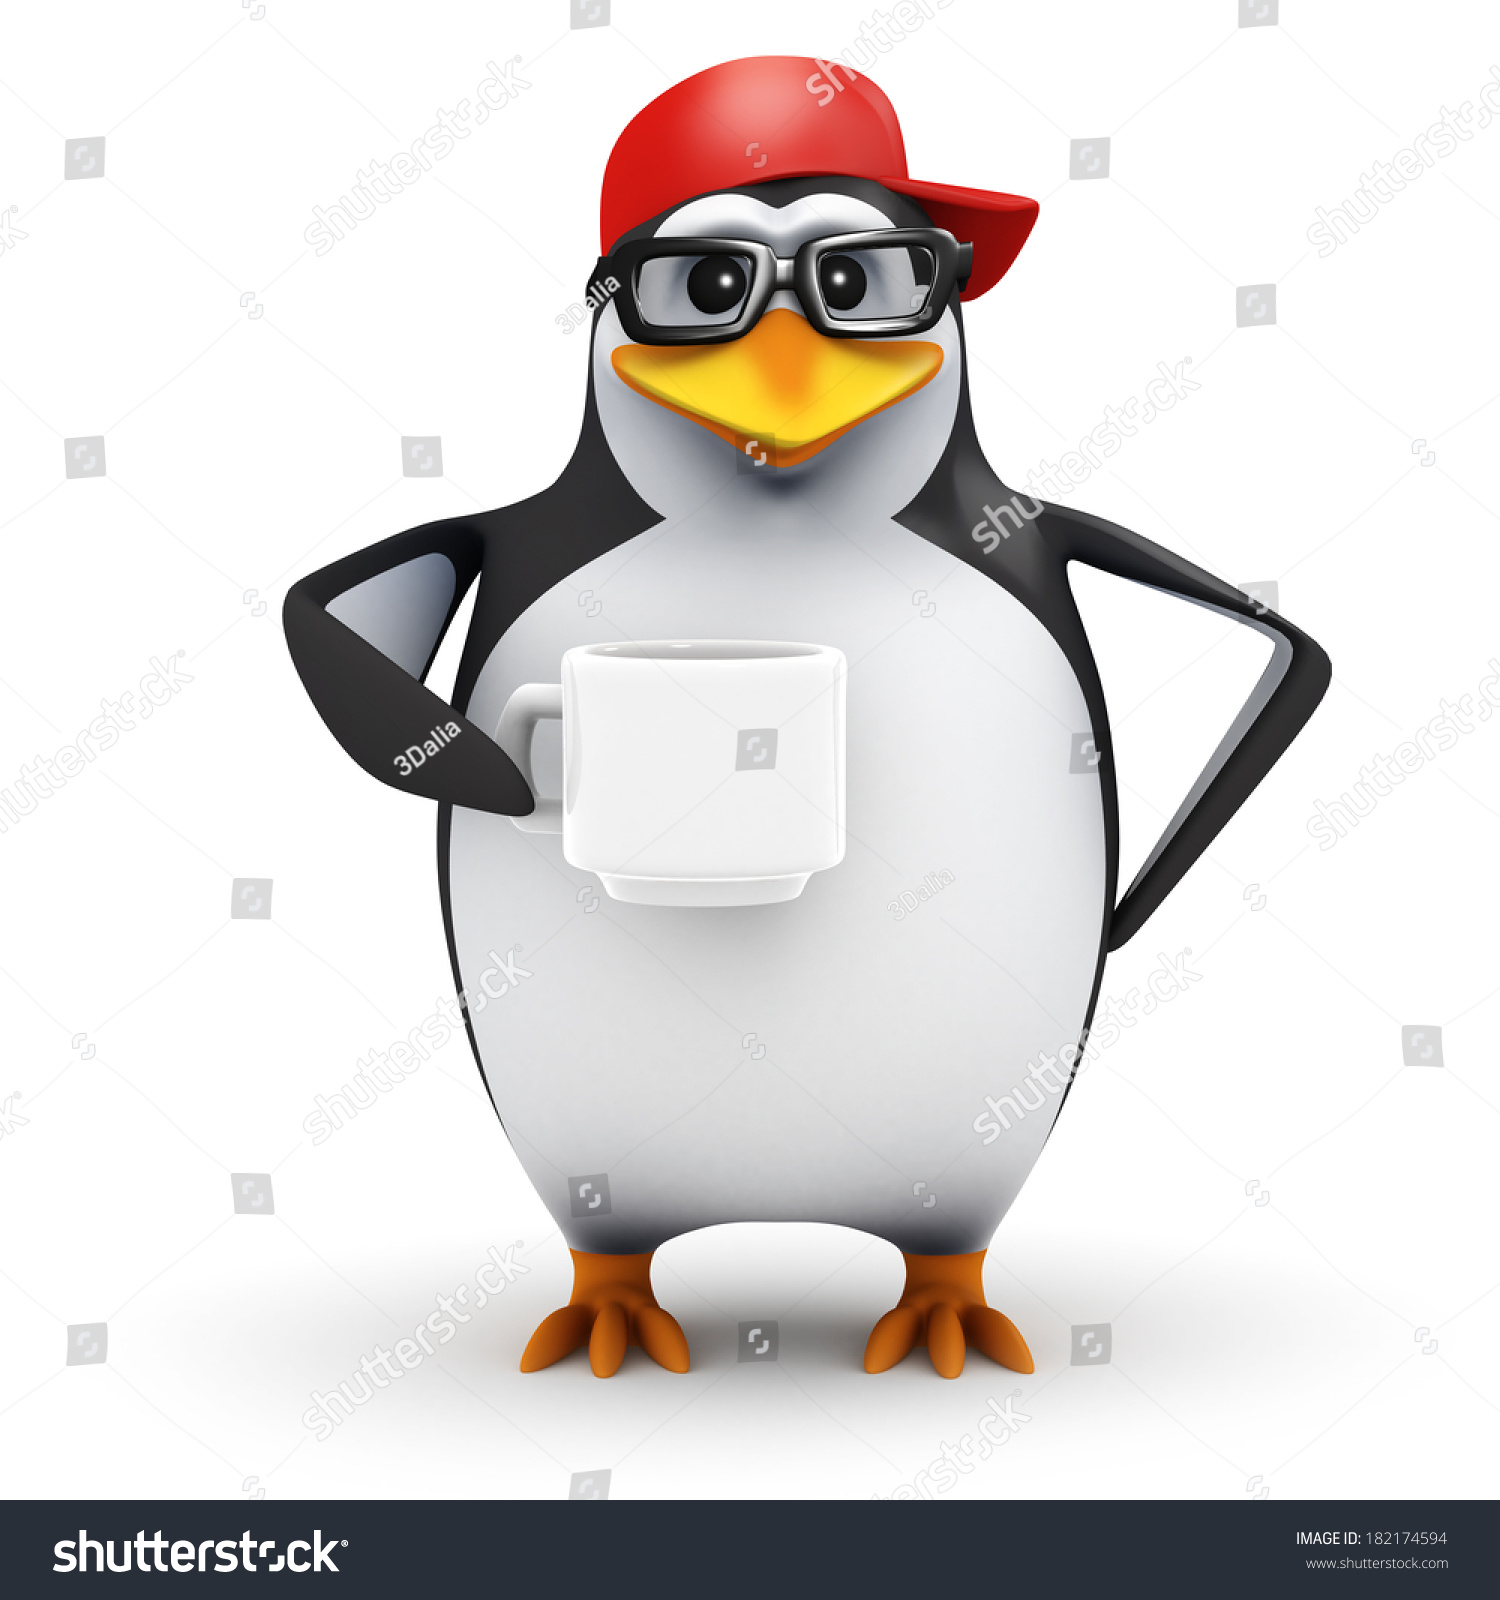 3d Render Of A Penguin Drinking From A Cup Stock Photo 182174594 ...